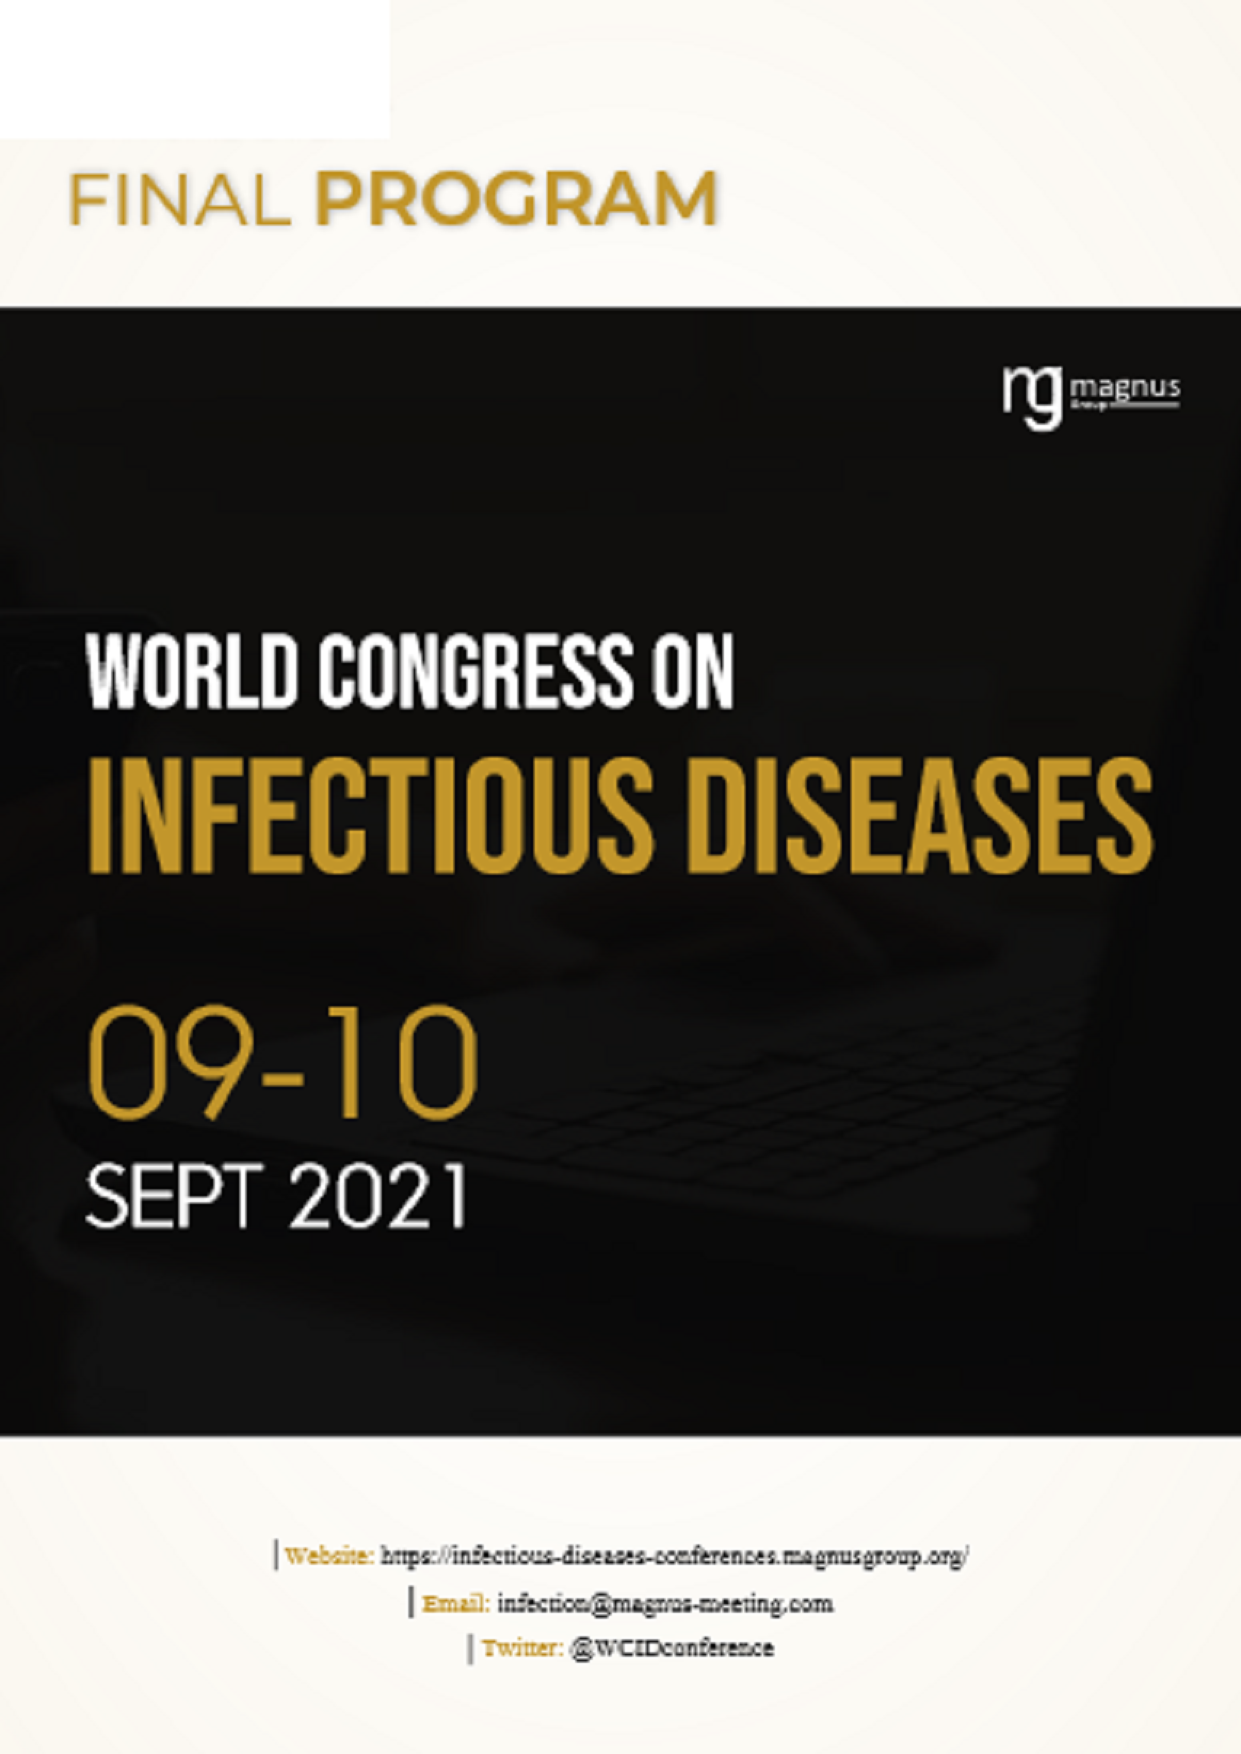 World Congress on Infectious Diseases | Online Event Program